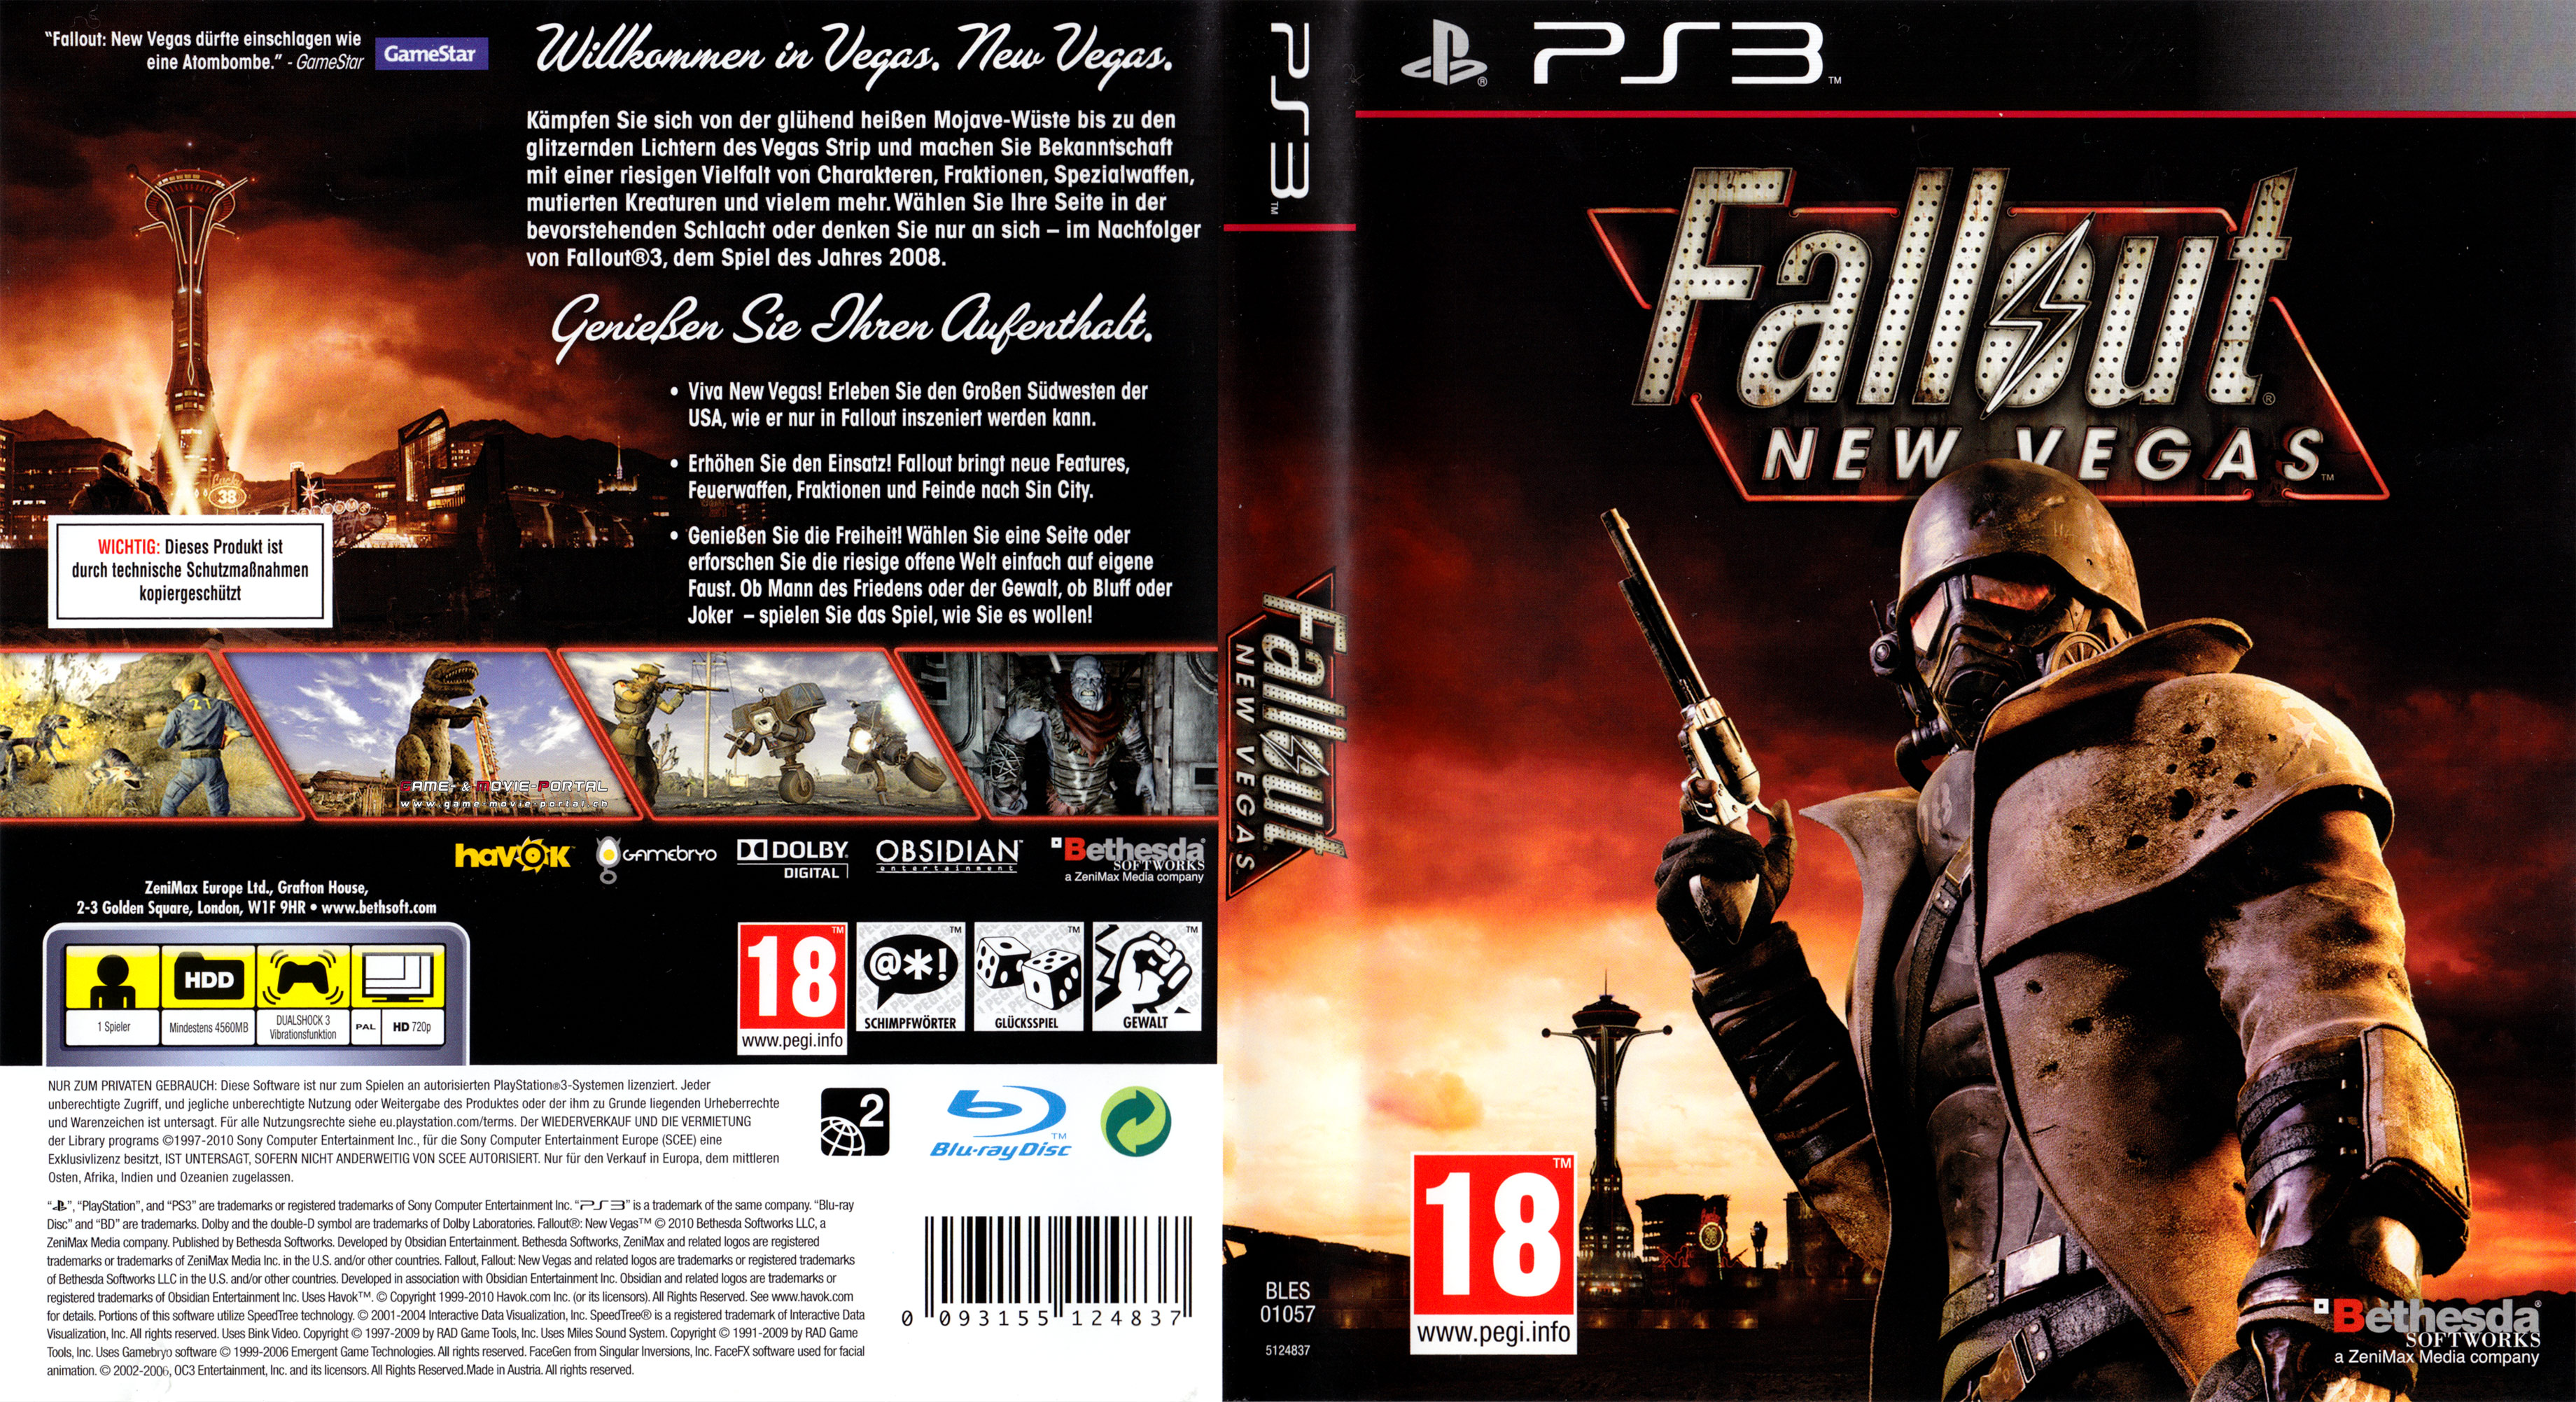 Fallout New Vegas Playstation 3 Covers Cover Century Over 500 000 Album Art Covers For Free